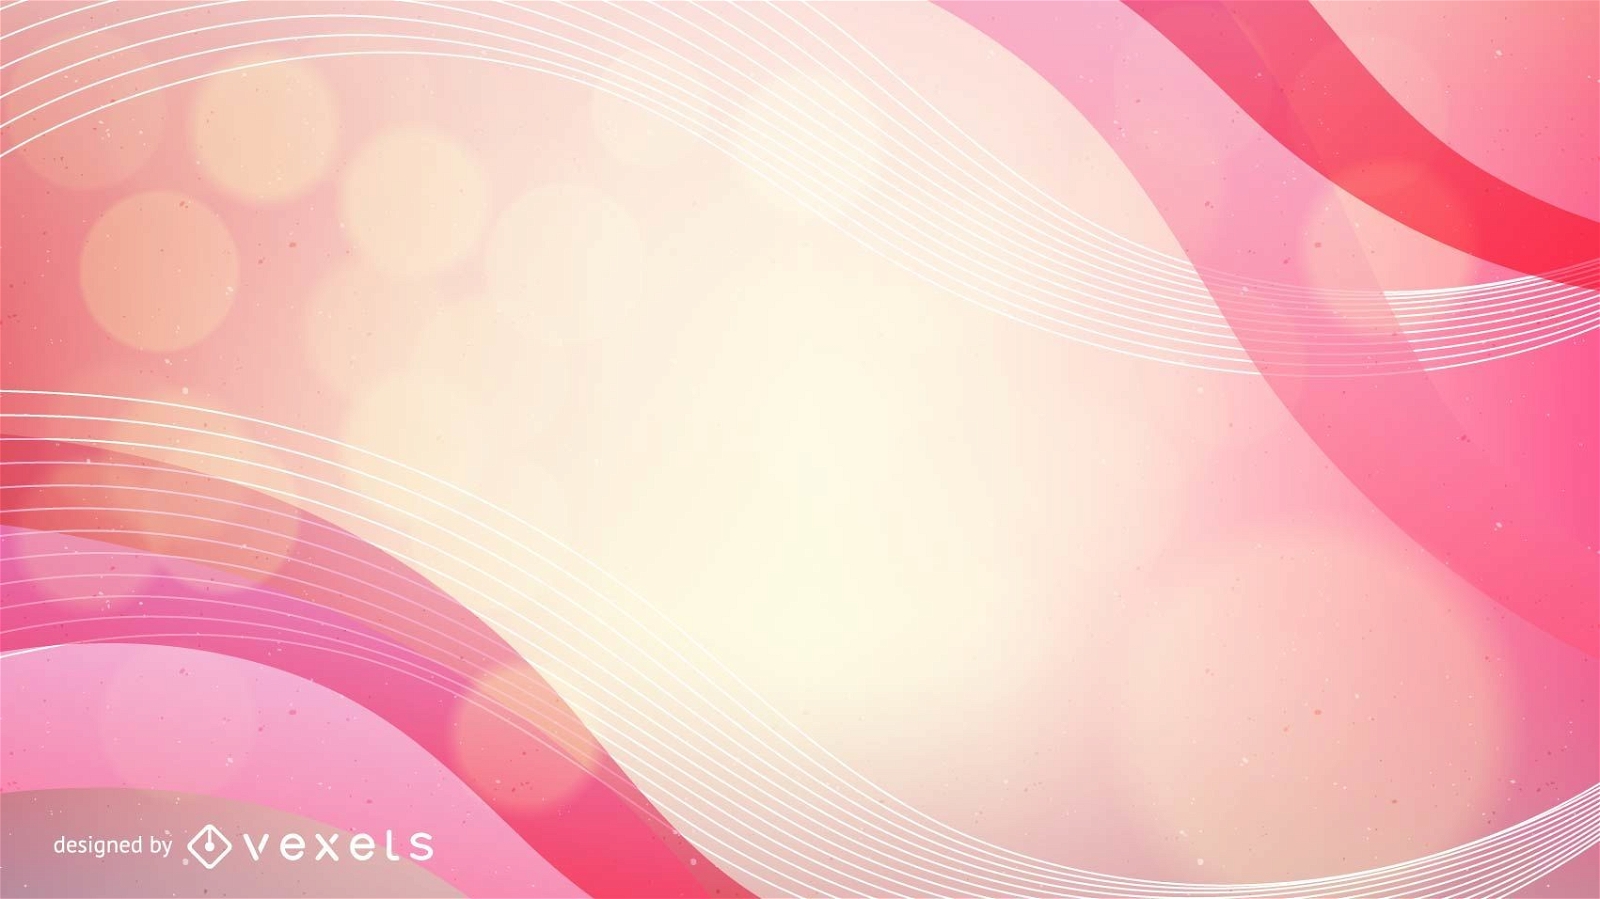 Pink Abstract Spiral & Waving Lines Background Vector Download